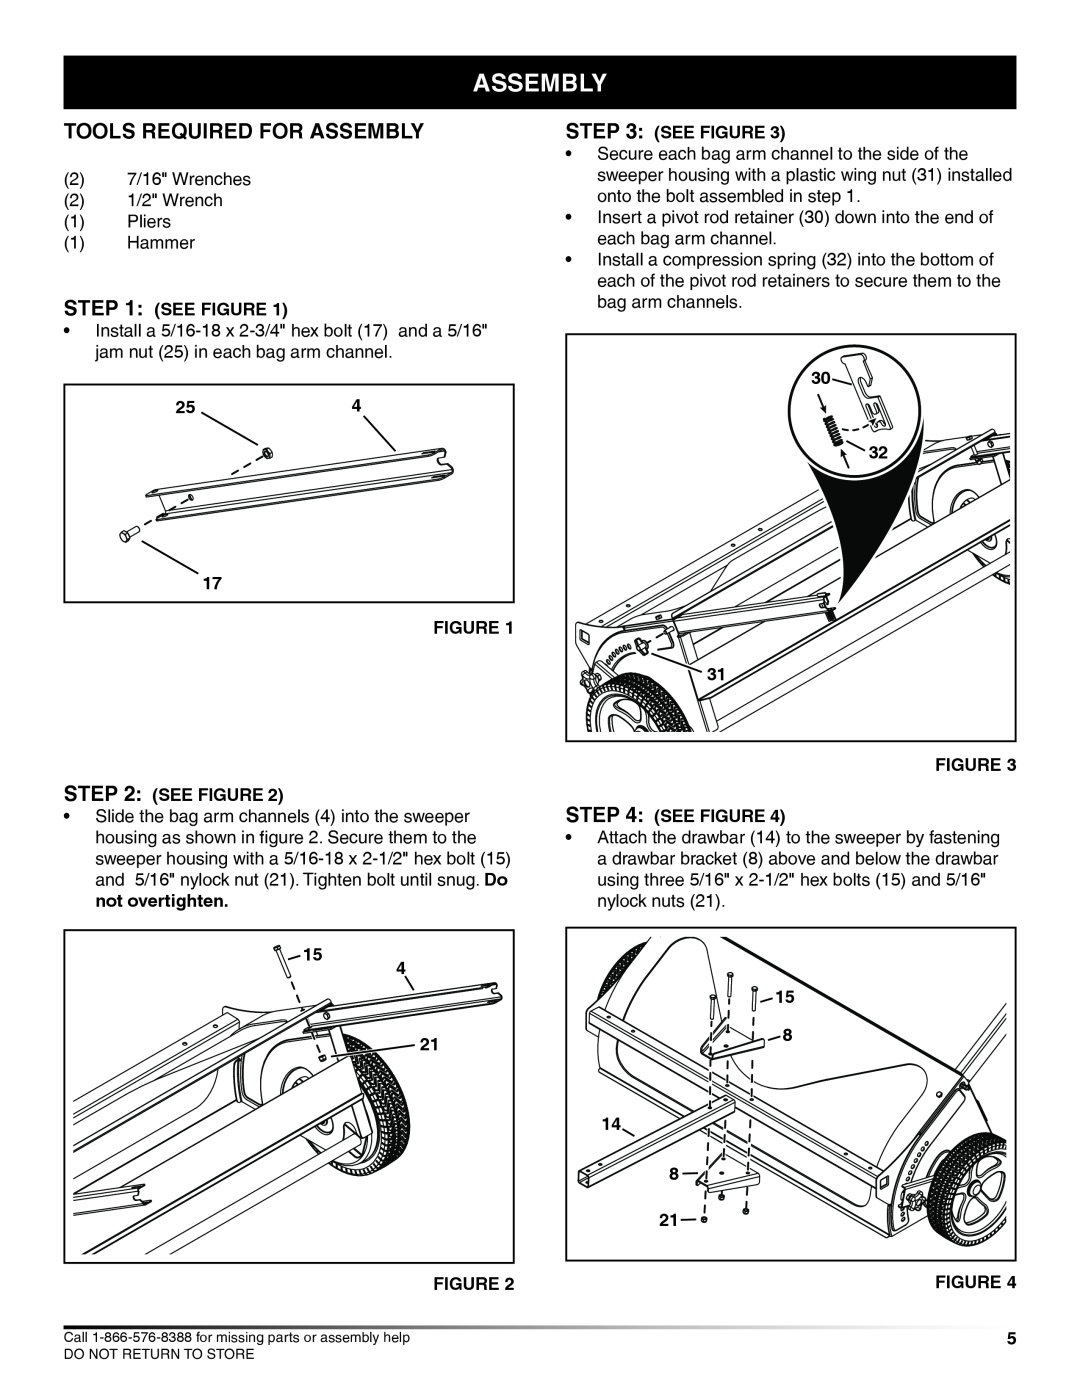 Craftsman 486.24229 manual Tools Required For Assembly 